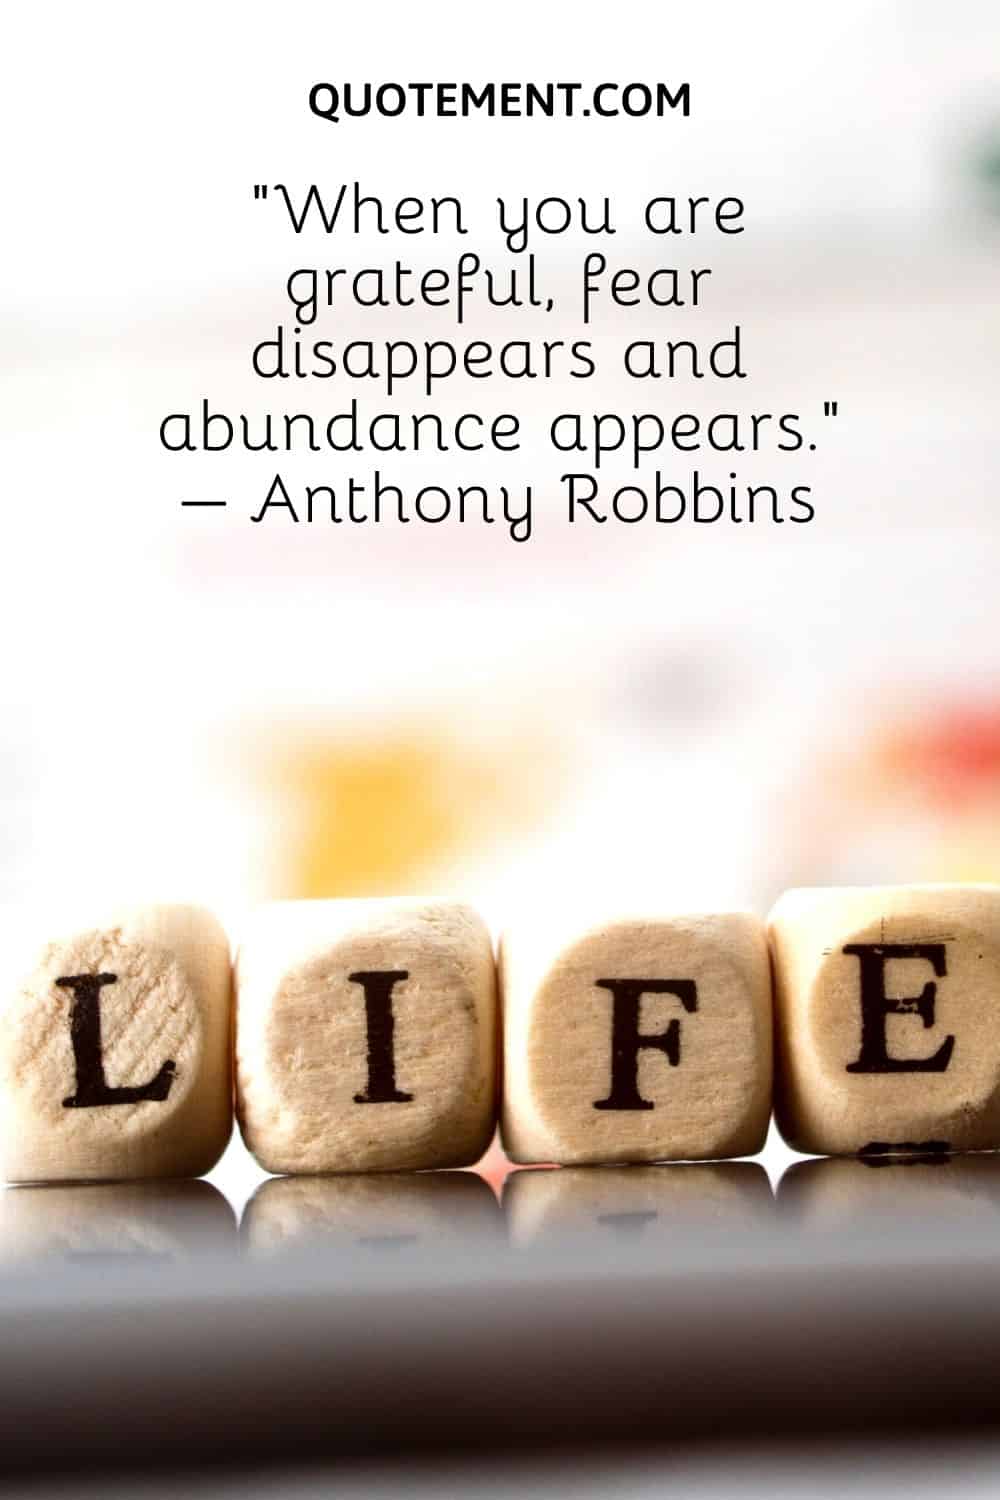 fear disappears and abundance appears